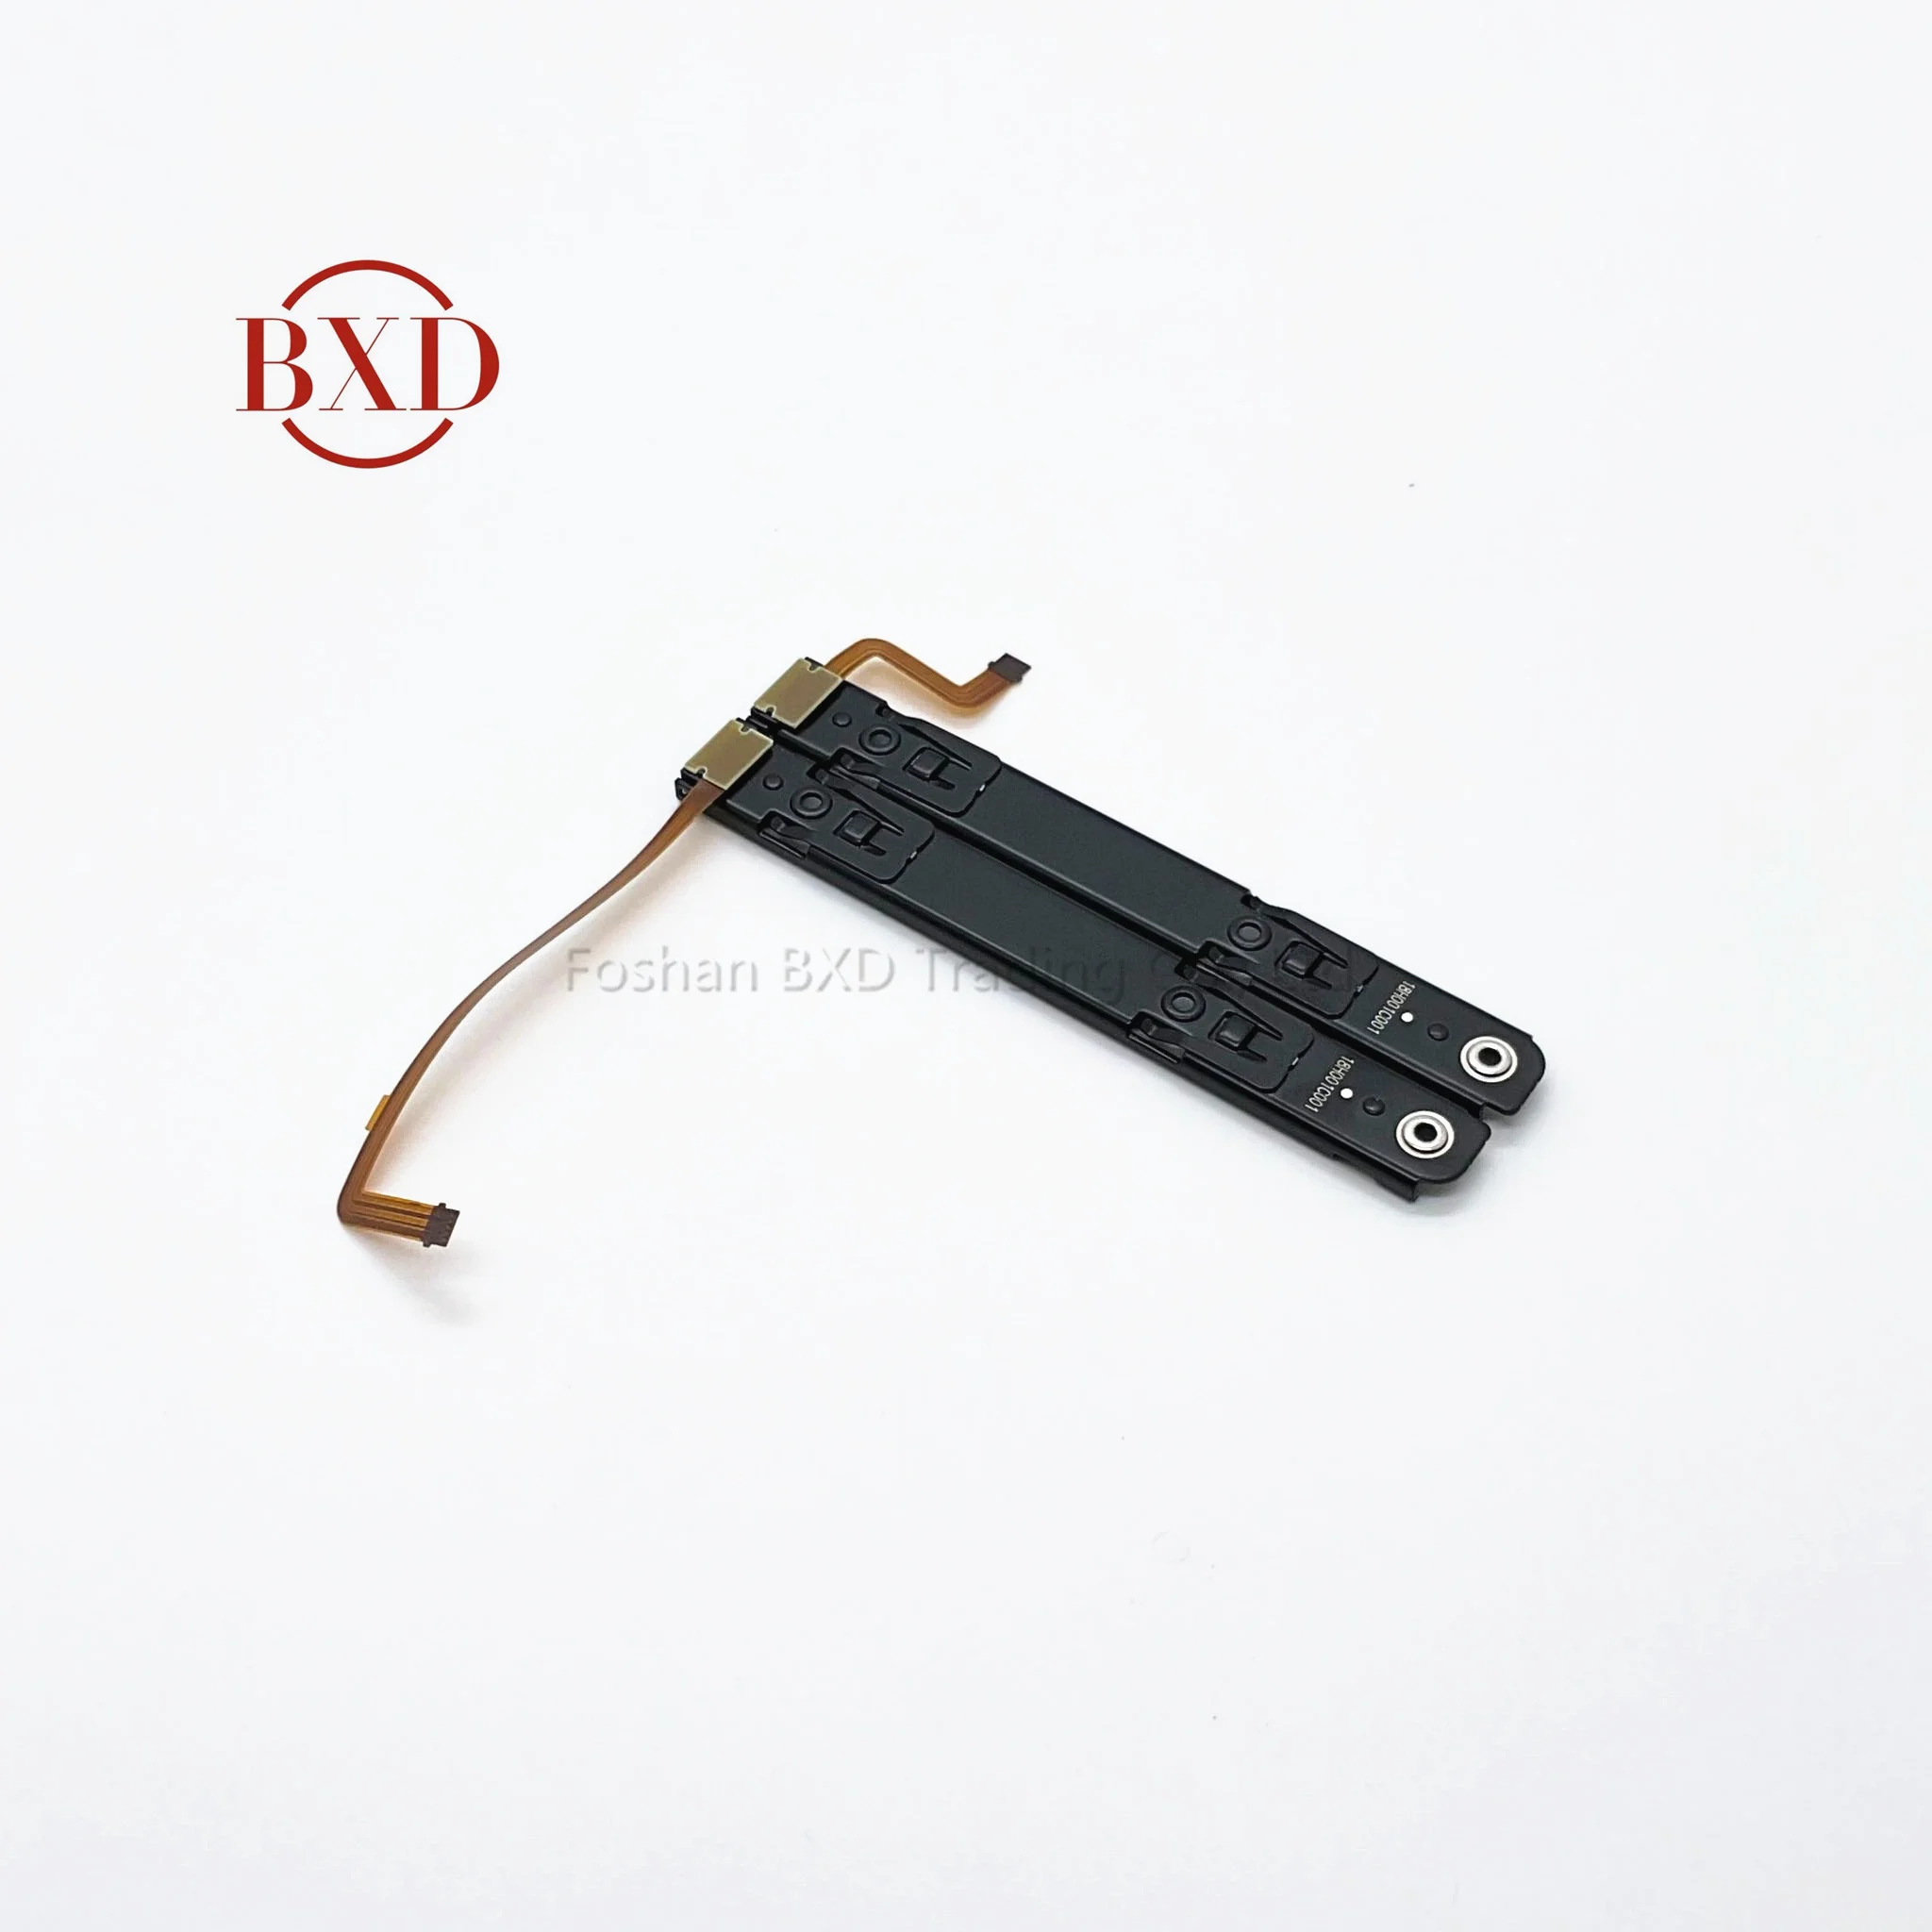 

1 Pair New Left Right Slider L R Sliding Rail with Flex Cable for Nintendo Switch OLED Console Accessories